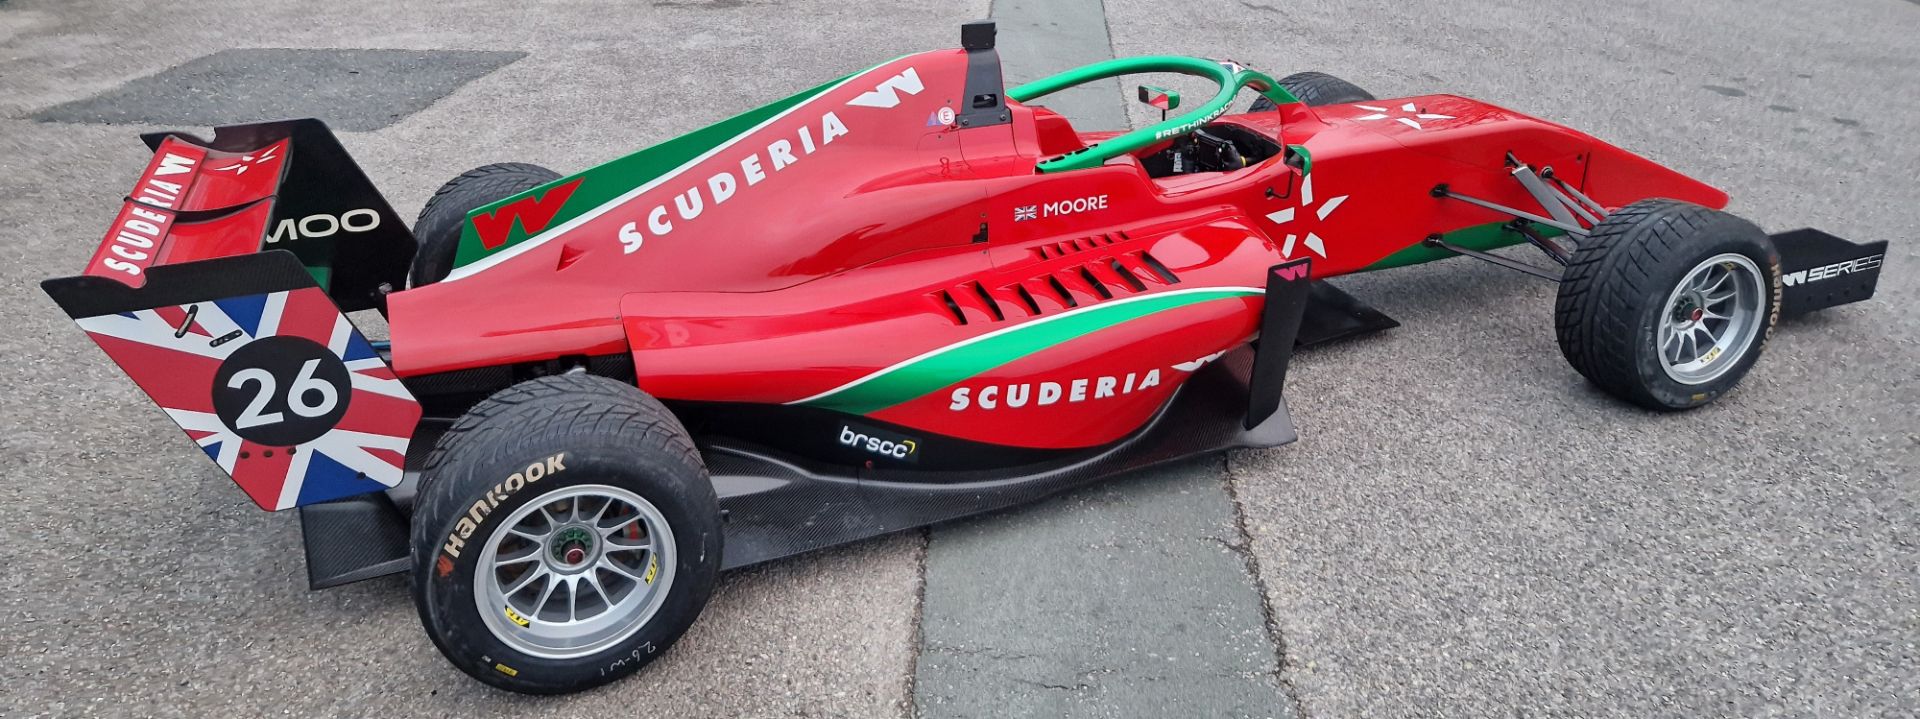 One TATUUS F3 T-318 Alfa Romeo Race Car Chassis No. 038 (2019) Finished in SCUDERIA Livery as Driven - Image 2 of 10